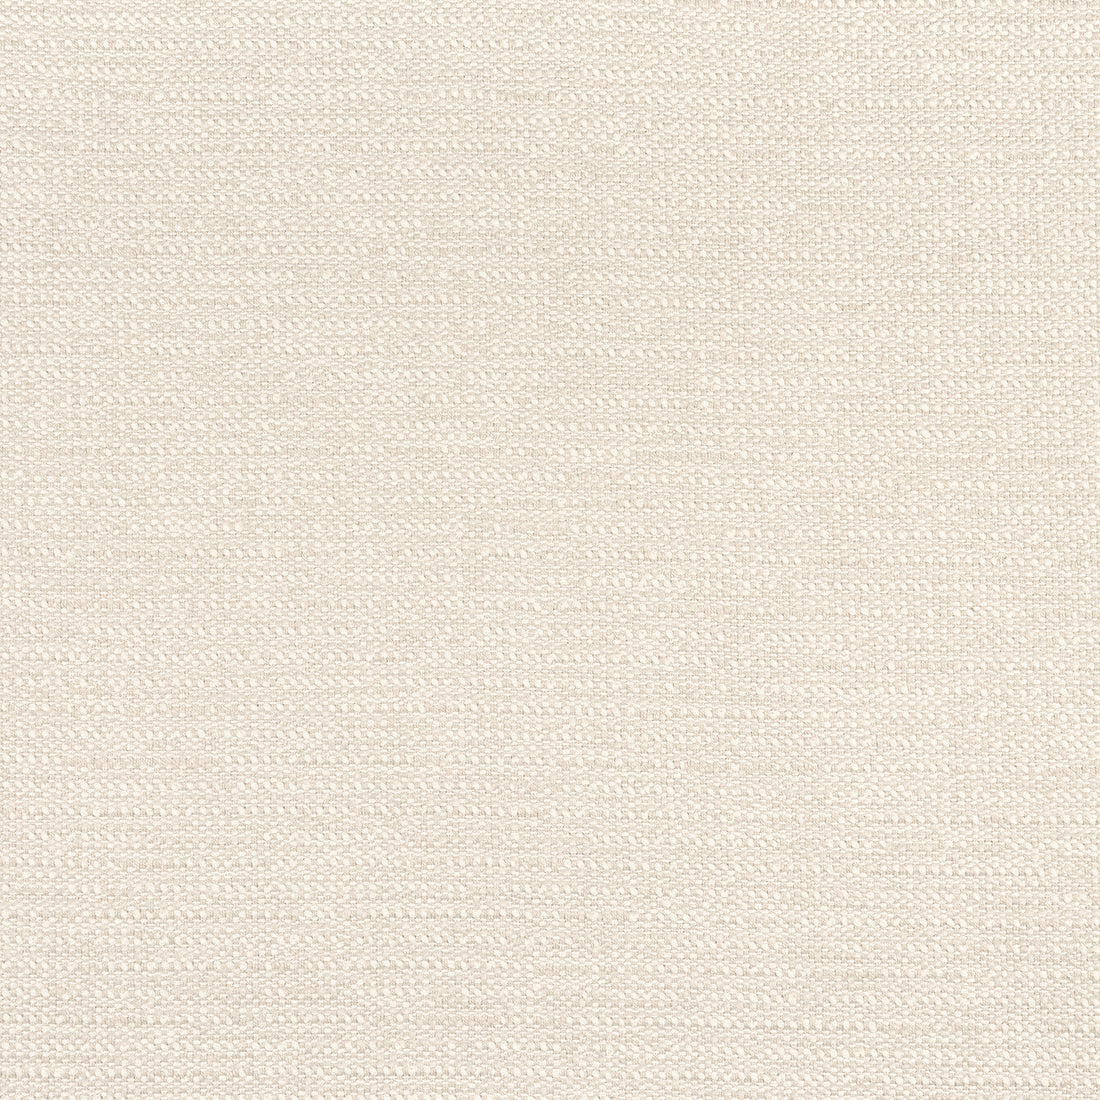 Petra fabric in almond color - pattern number W8737 - by Thibaut in the Haven Textures collection